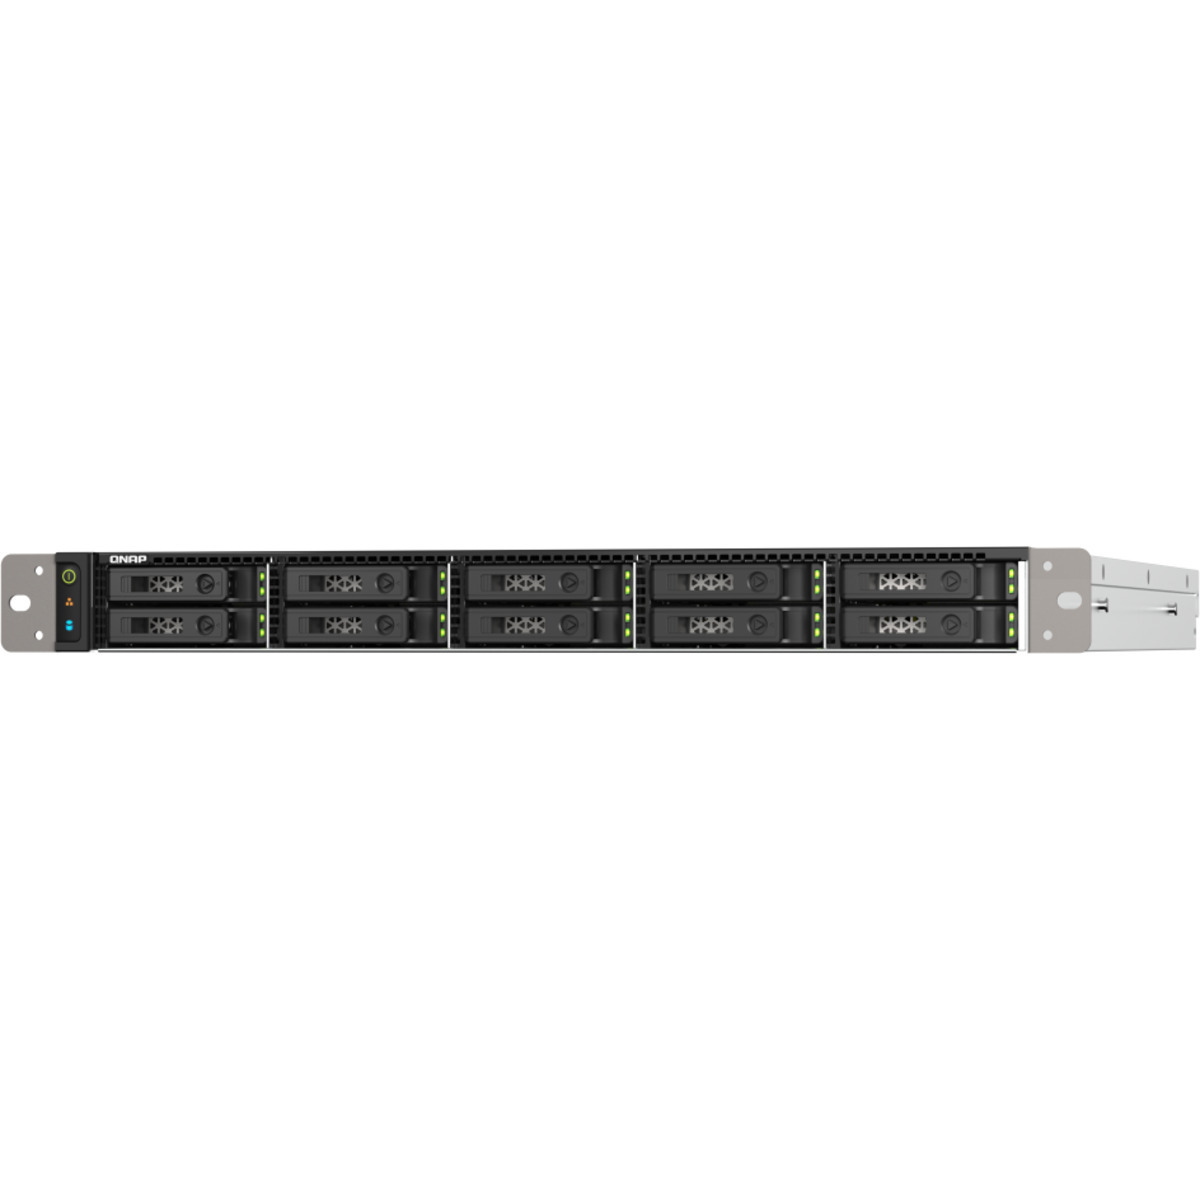 buy QNAP TS-h1090FU-7302P 40tb RackMount NAS - Network Attached Storage Device 10x4000gb Samsung 870 EVO MZ-77E4T0BAM 2.5 560/530MB/s SATA 6Gb/s SSD CONSUMER Class Drives Installed - Burn-In Tested - nas headquarters buy network attached storage server device das new raid-5 free shipping usa spring sale TS-h1090FU-7302P